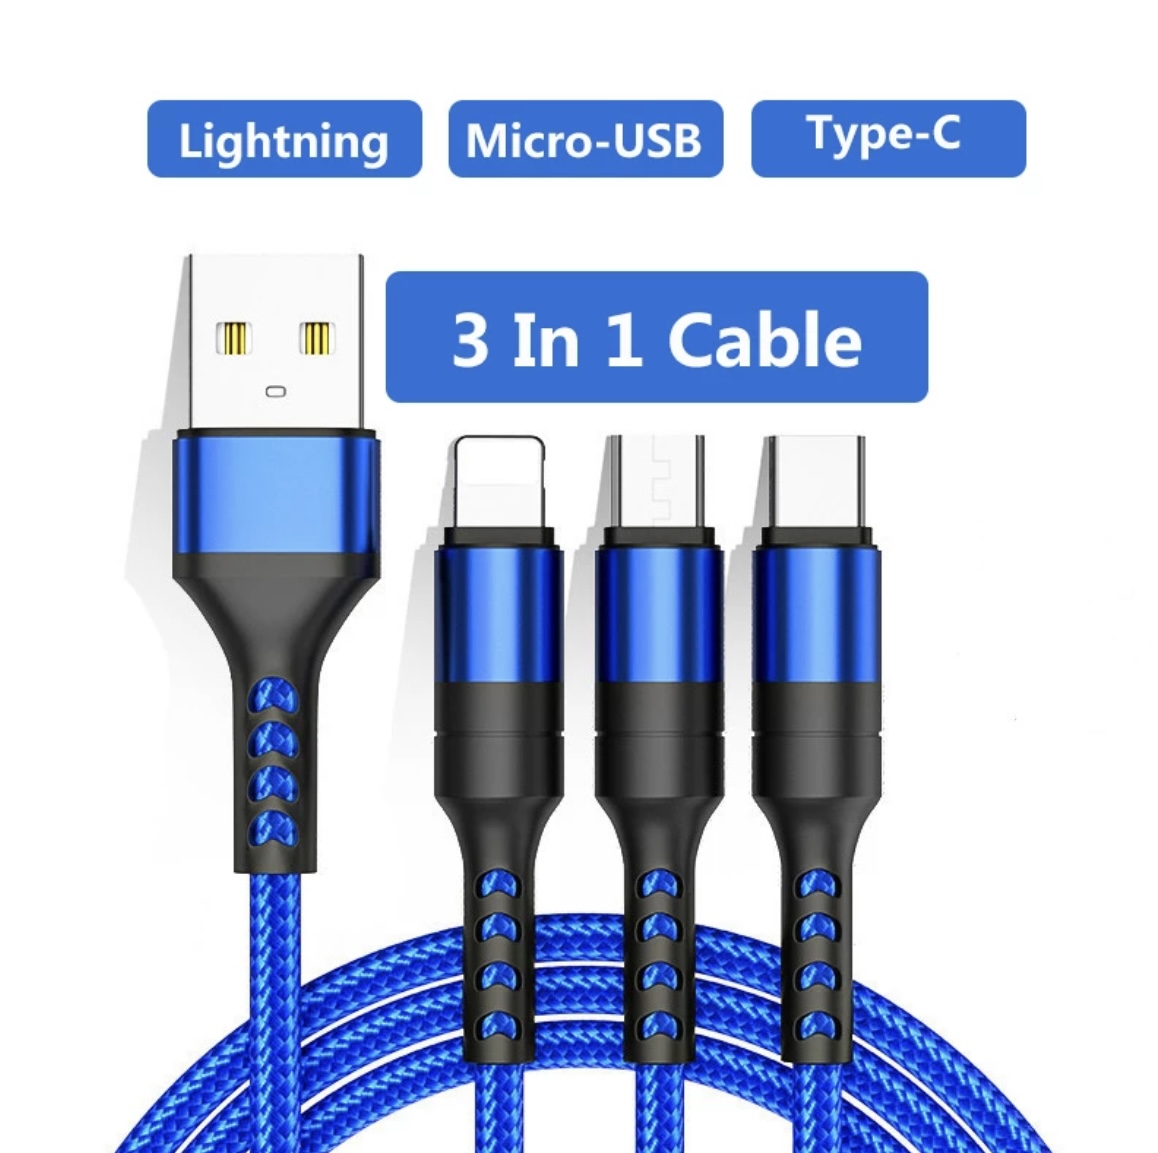 Quality 3 in1 USB Cable for IPhone Fast Charger Charging Cable for Micro USB Phone Type C Xiaomi Huawei Samsung Charger Wire for IPad